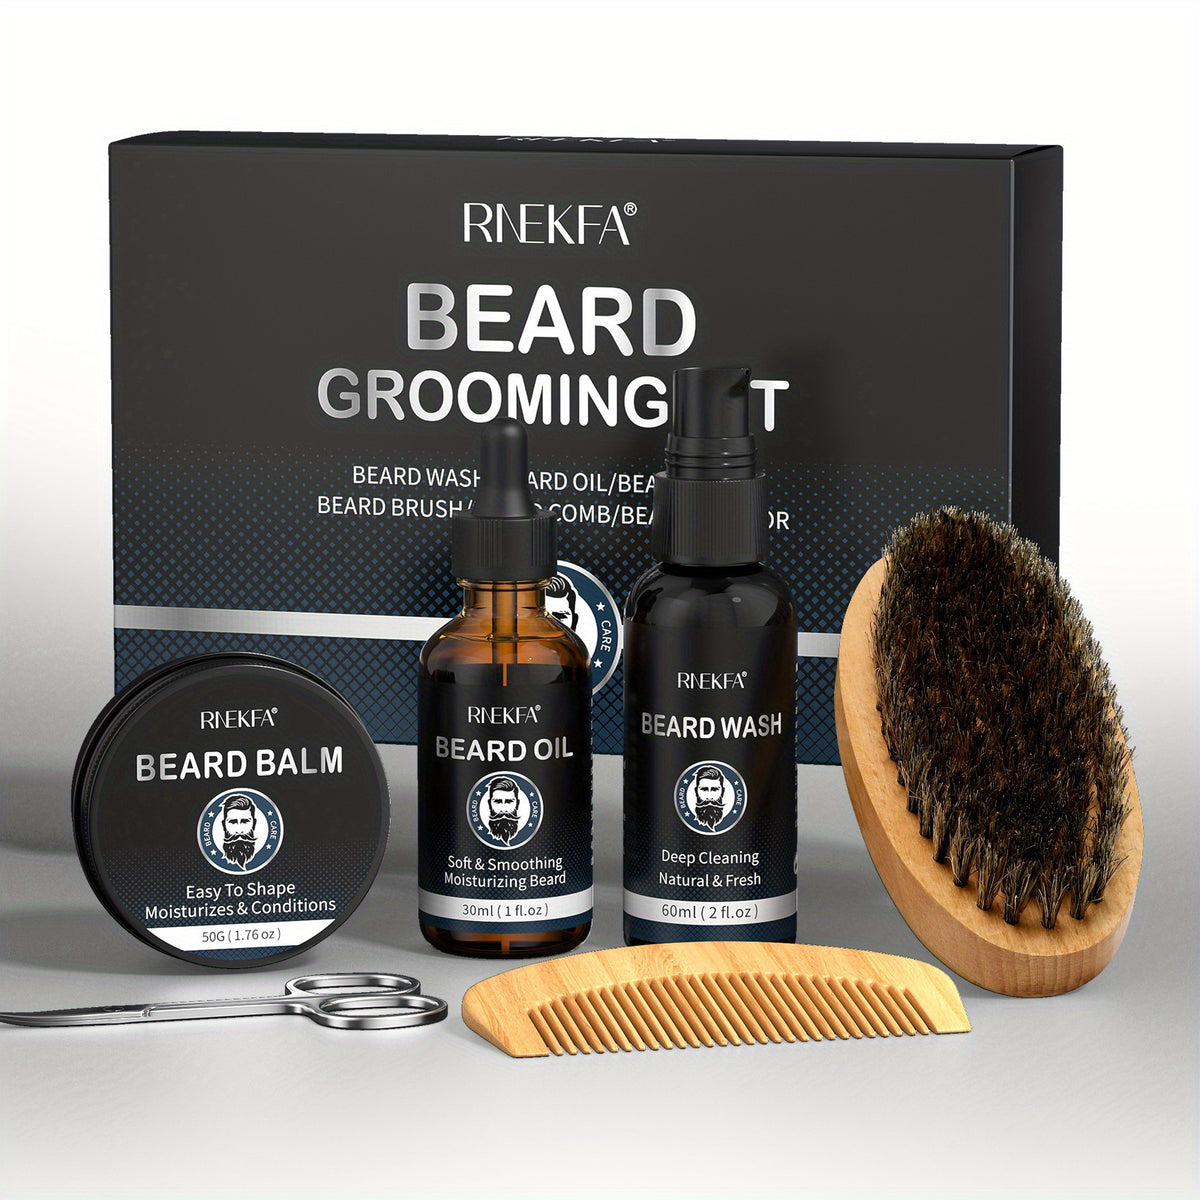 Beard Grooming Kit For Men, Natural Jojoba Oil Beard Oil Beard Balm Beard Wash Product Beard Brush Comb Grooming Kit, Holiday Gift, Father's Day Gift Father's Day Gift